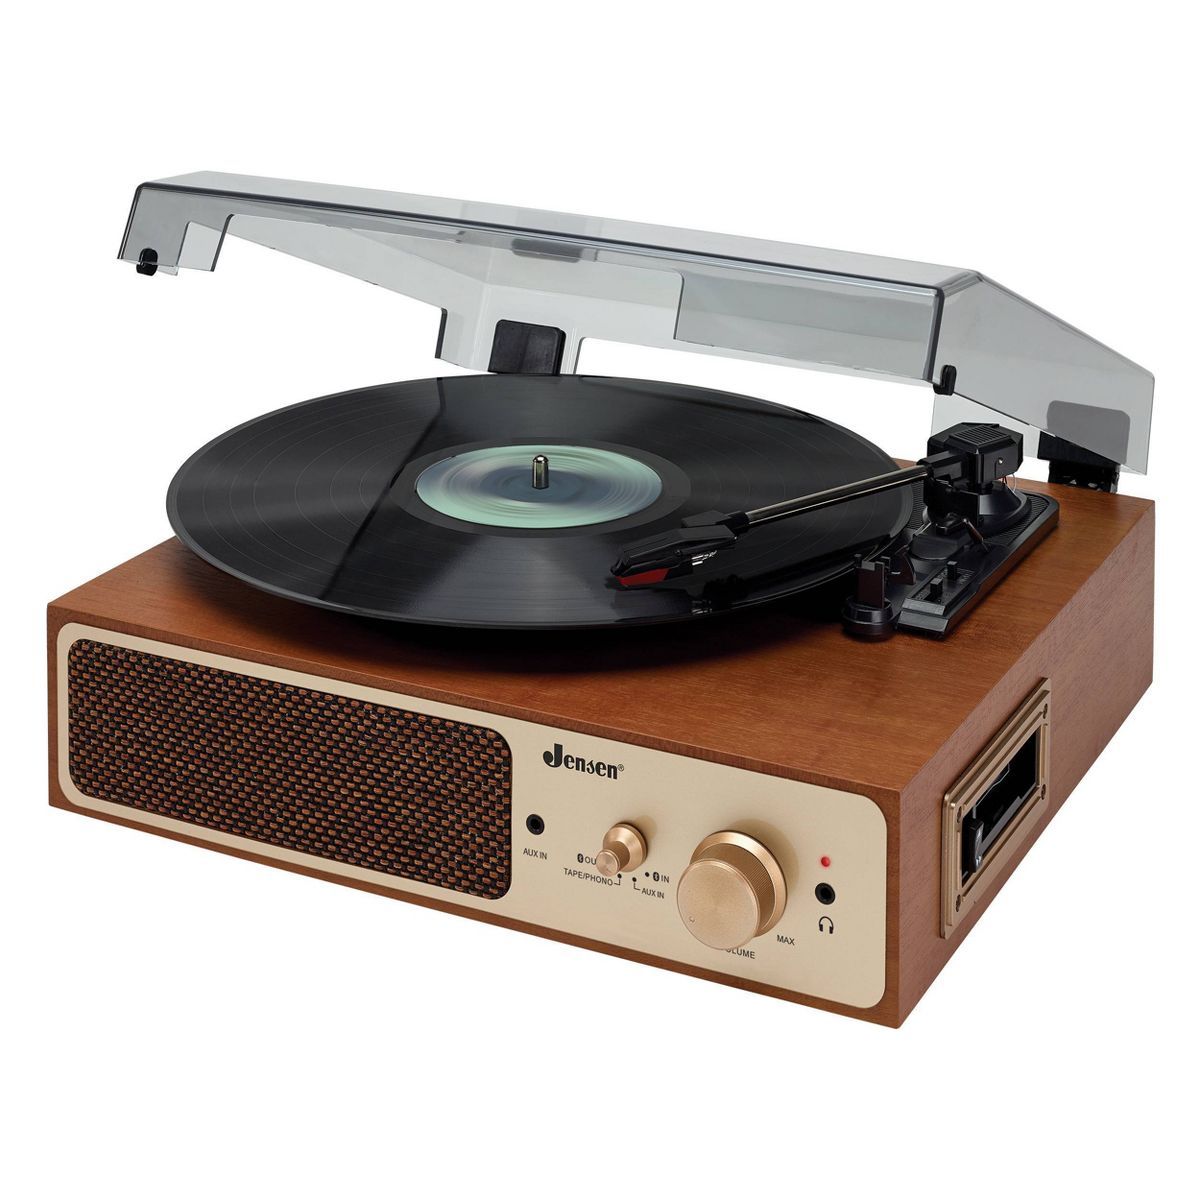 JENSEN 3-Speed Stereo Turntable with Stereo Speakers and Dual Bluetooth Transmit/Receive - Brown | Target